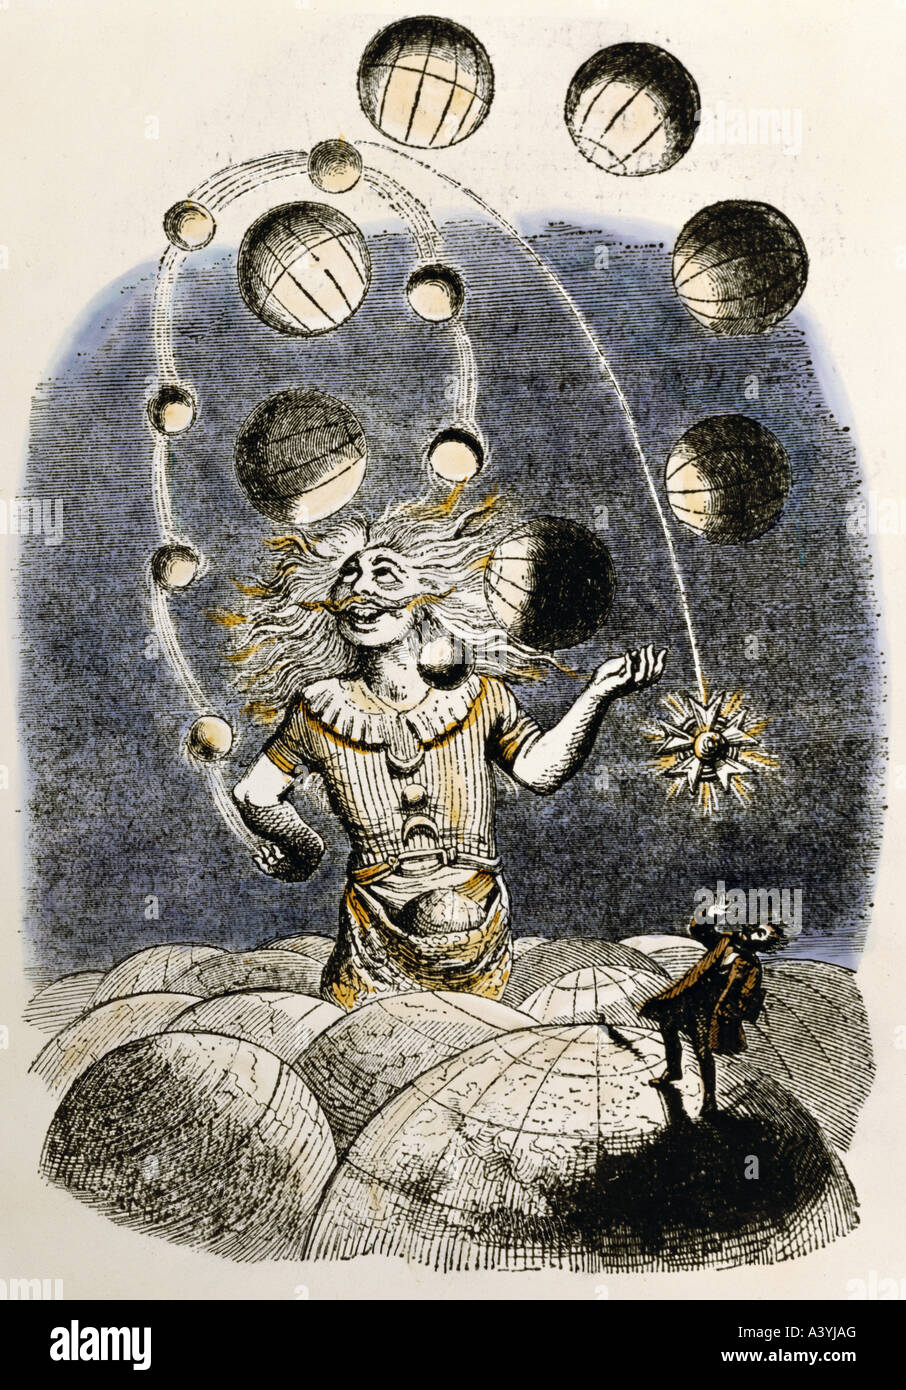 astronomy, constellations, 'the origin of constellations', colour engraving, by Grandville, birth name Jean Ignace Isidore Gerard (1803 - 1847), from 'Une autre monde', Paris, 1844 / 1845, private collection, , Stock Photo